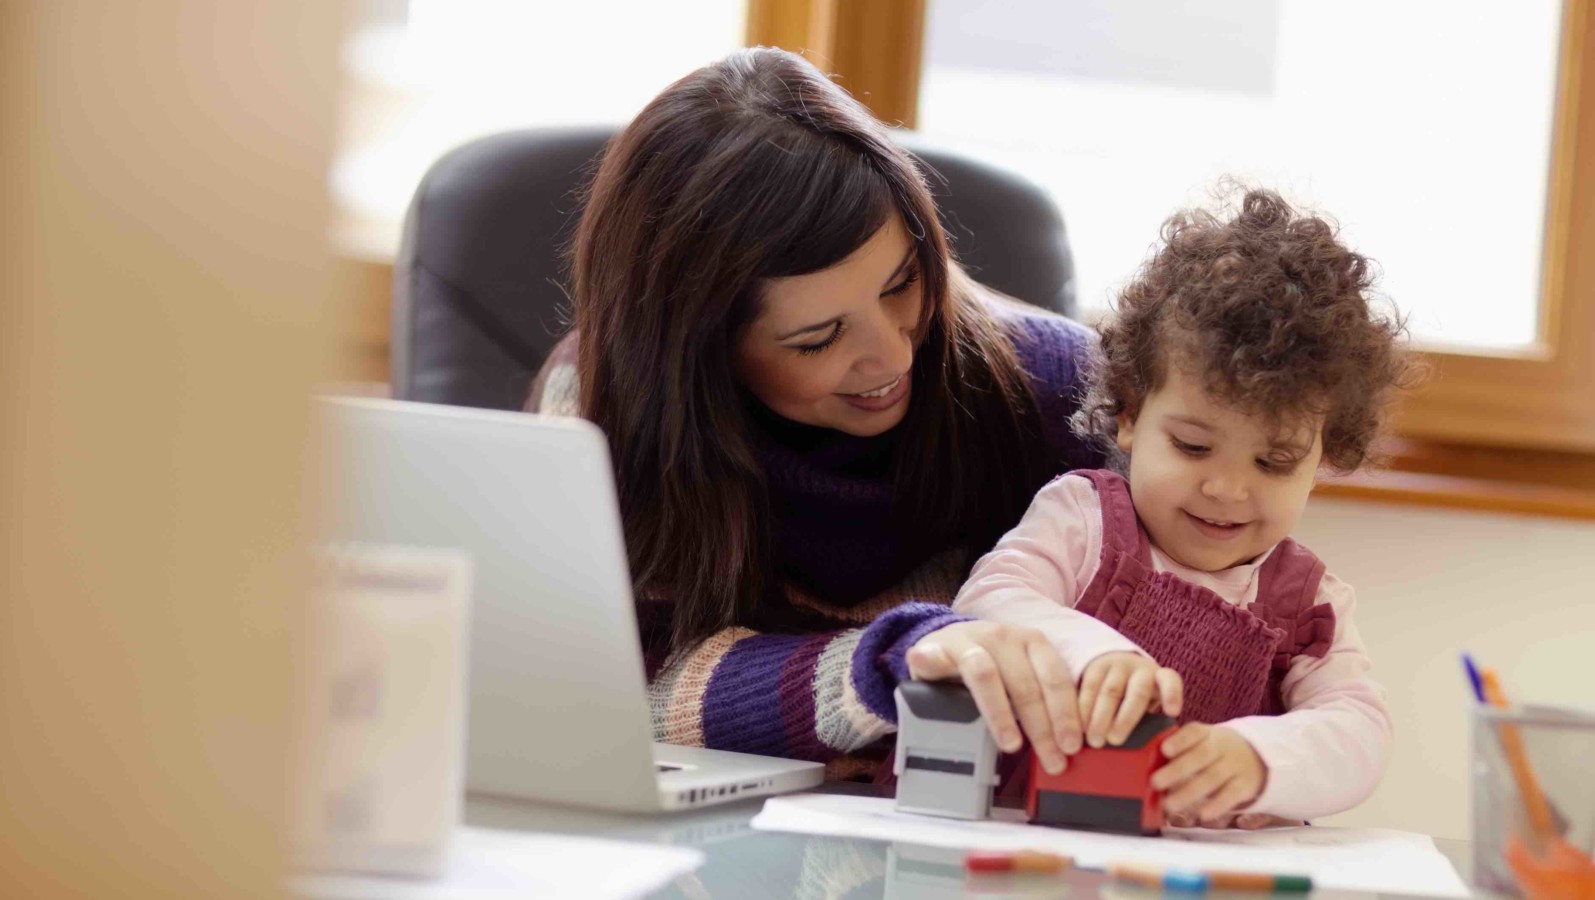 businesswoman working with laptop computer at home and playing with her baby girl. Horizontal shape, front view, waist up